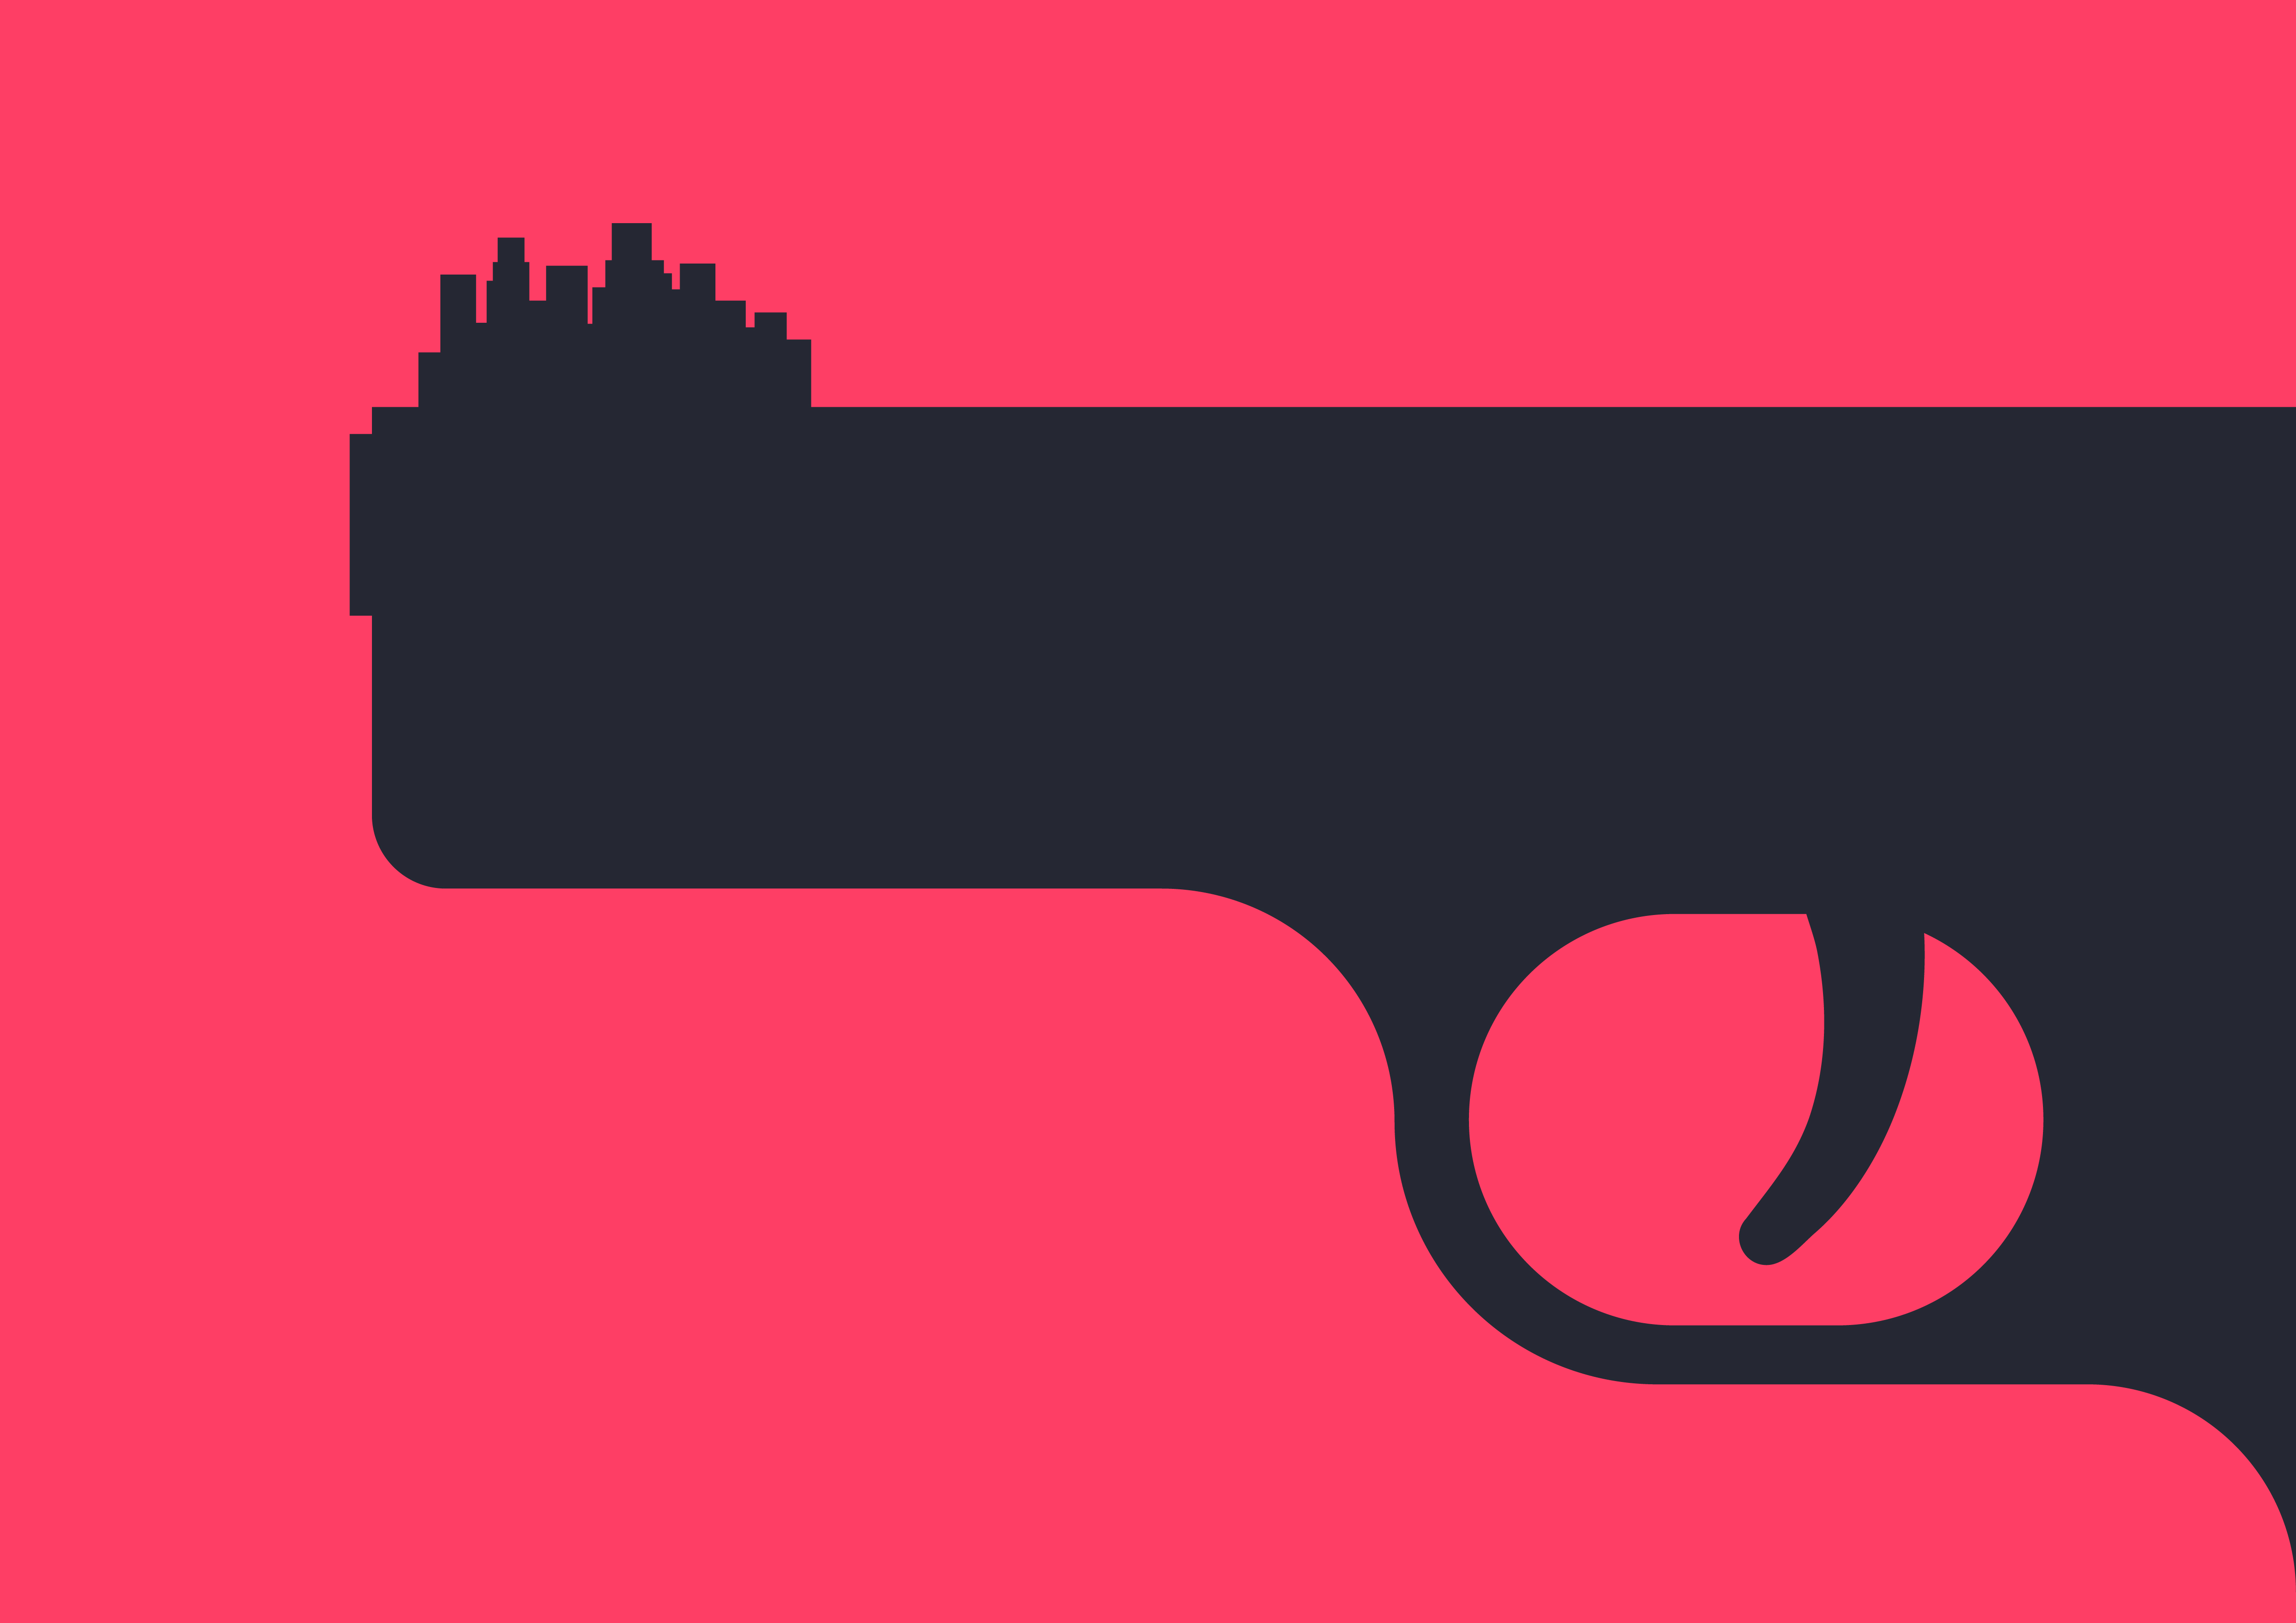 Graphic-style image of gun with a city on its tip - a symbol of teen gun violence